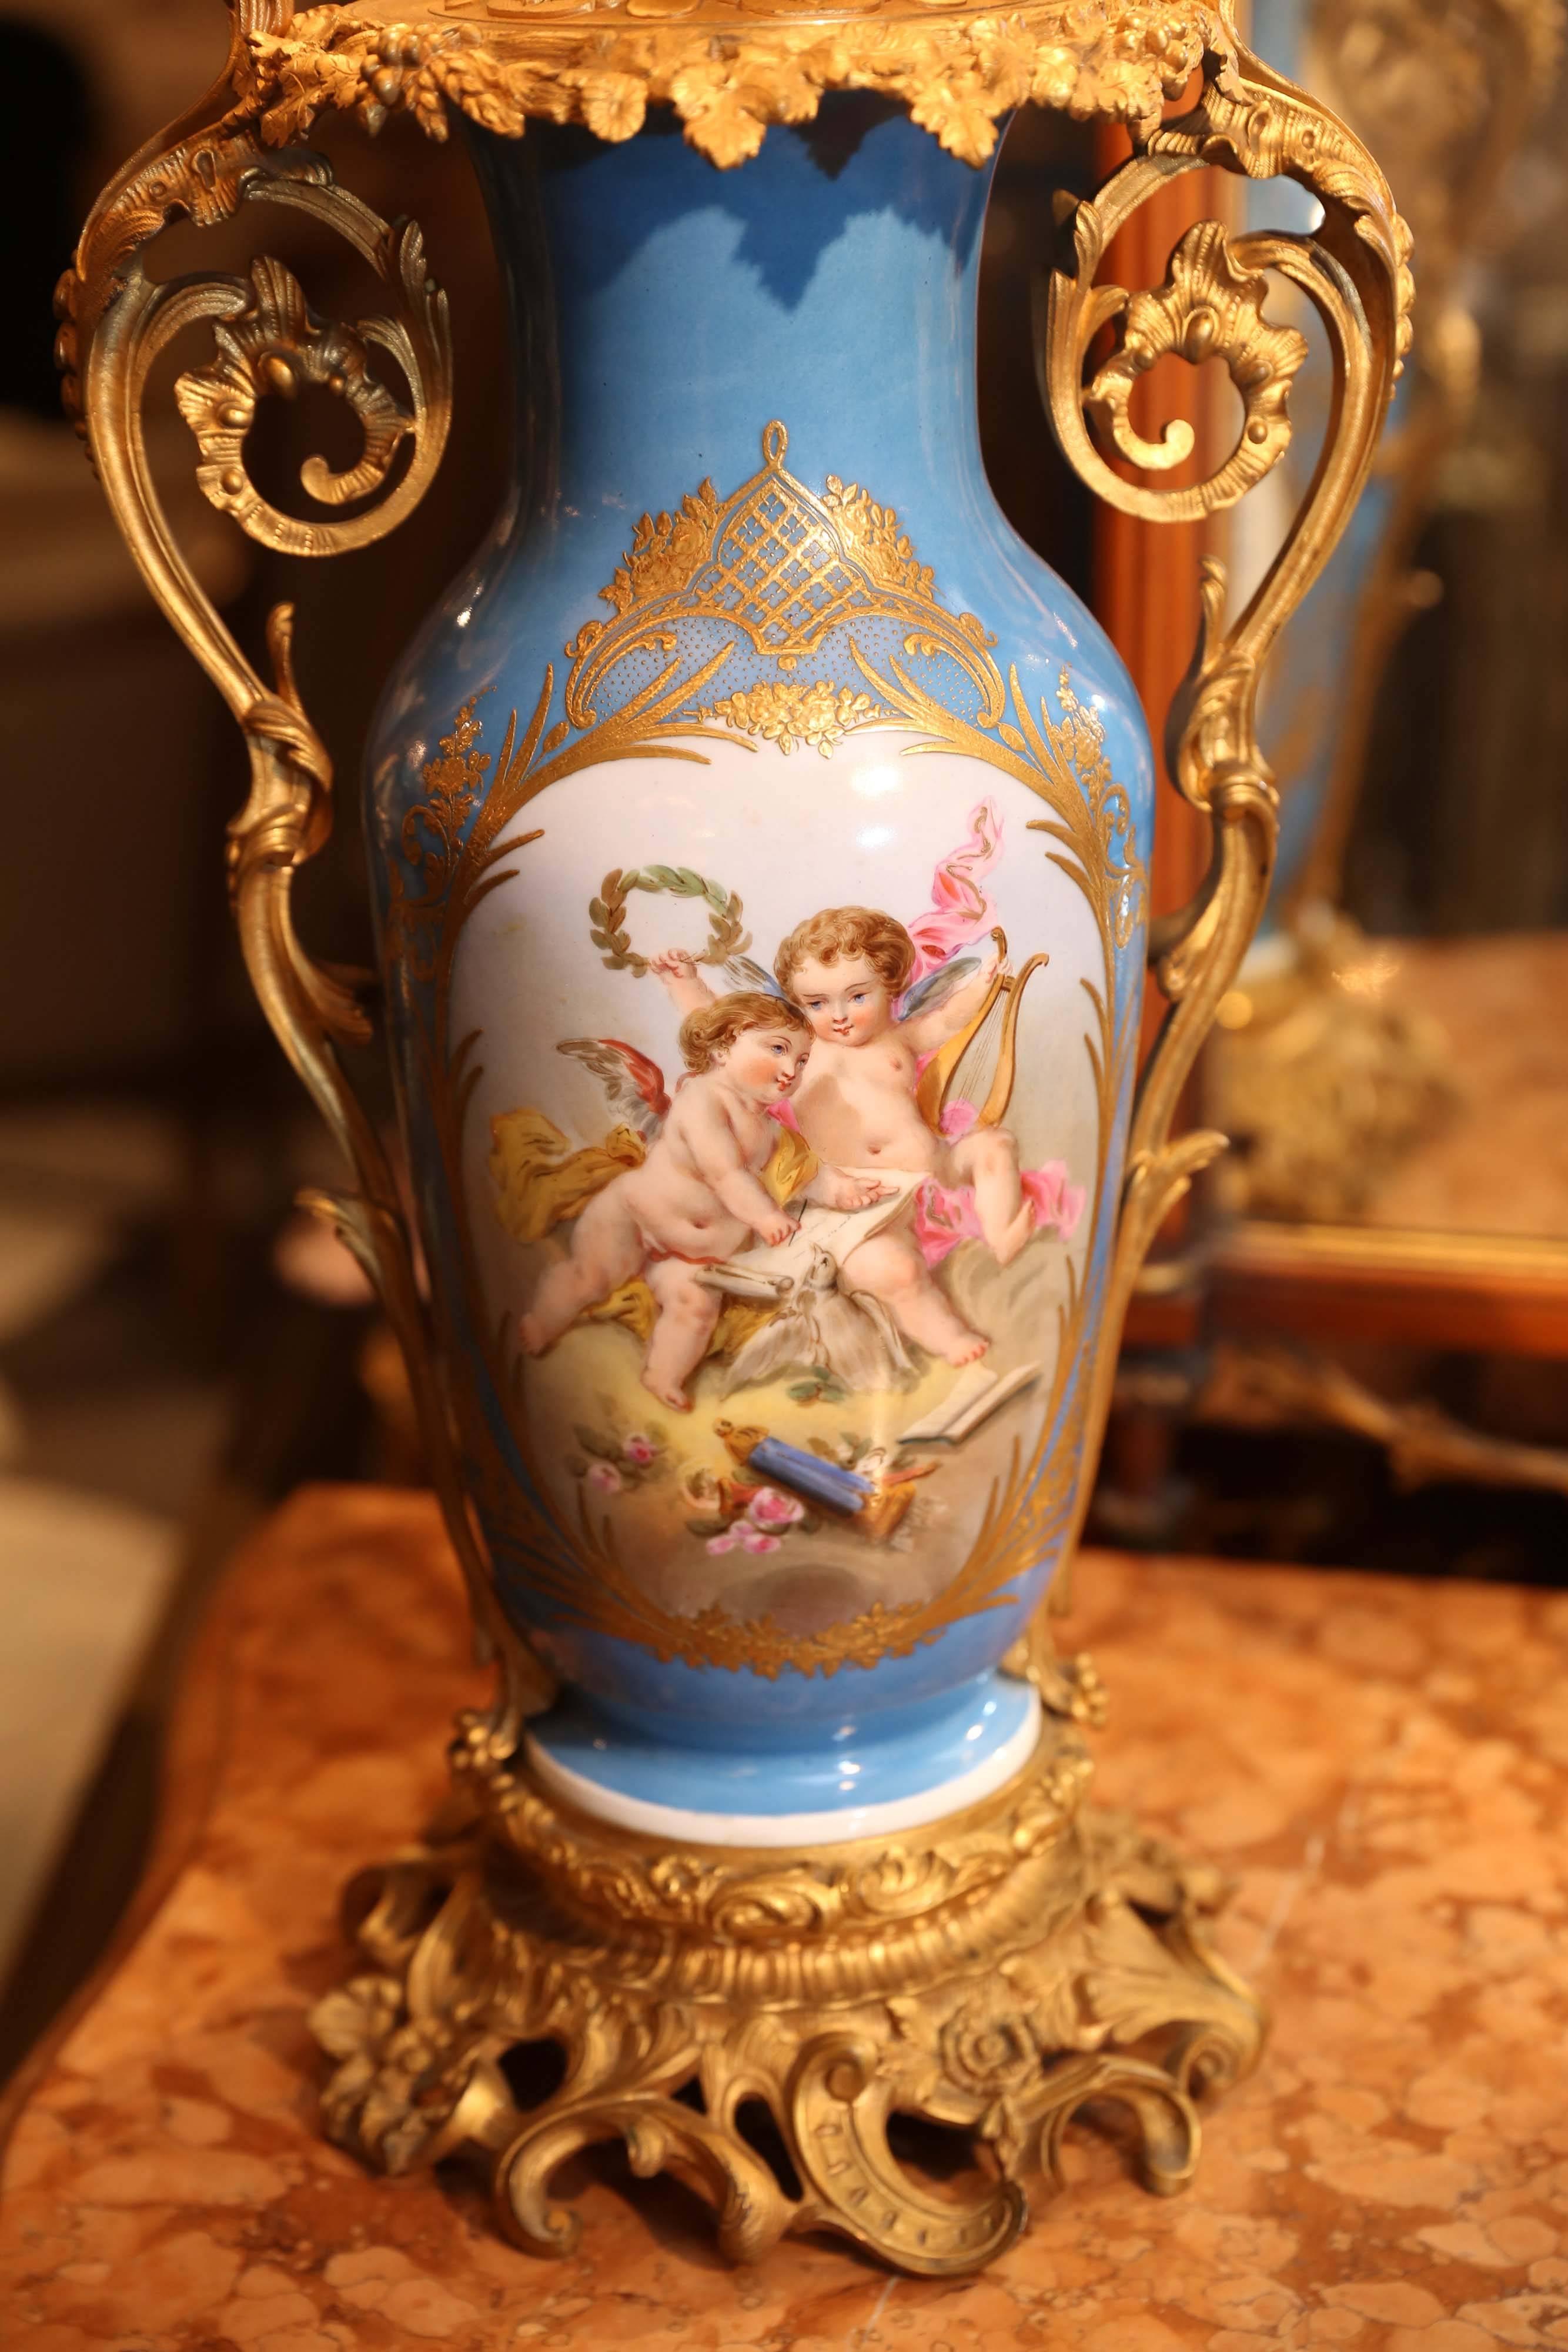 Bronze doré mounts decorate this Sèvres lamp with scrolling arms on each
side. The Sèvres Porcelain is painted with playful angels on one side and
a floral motif on the verso. Bronze gilt base.